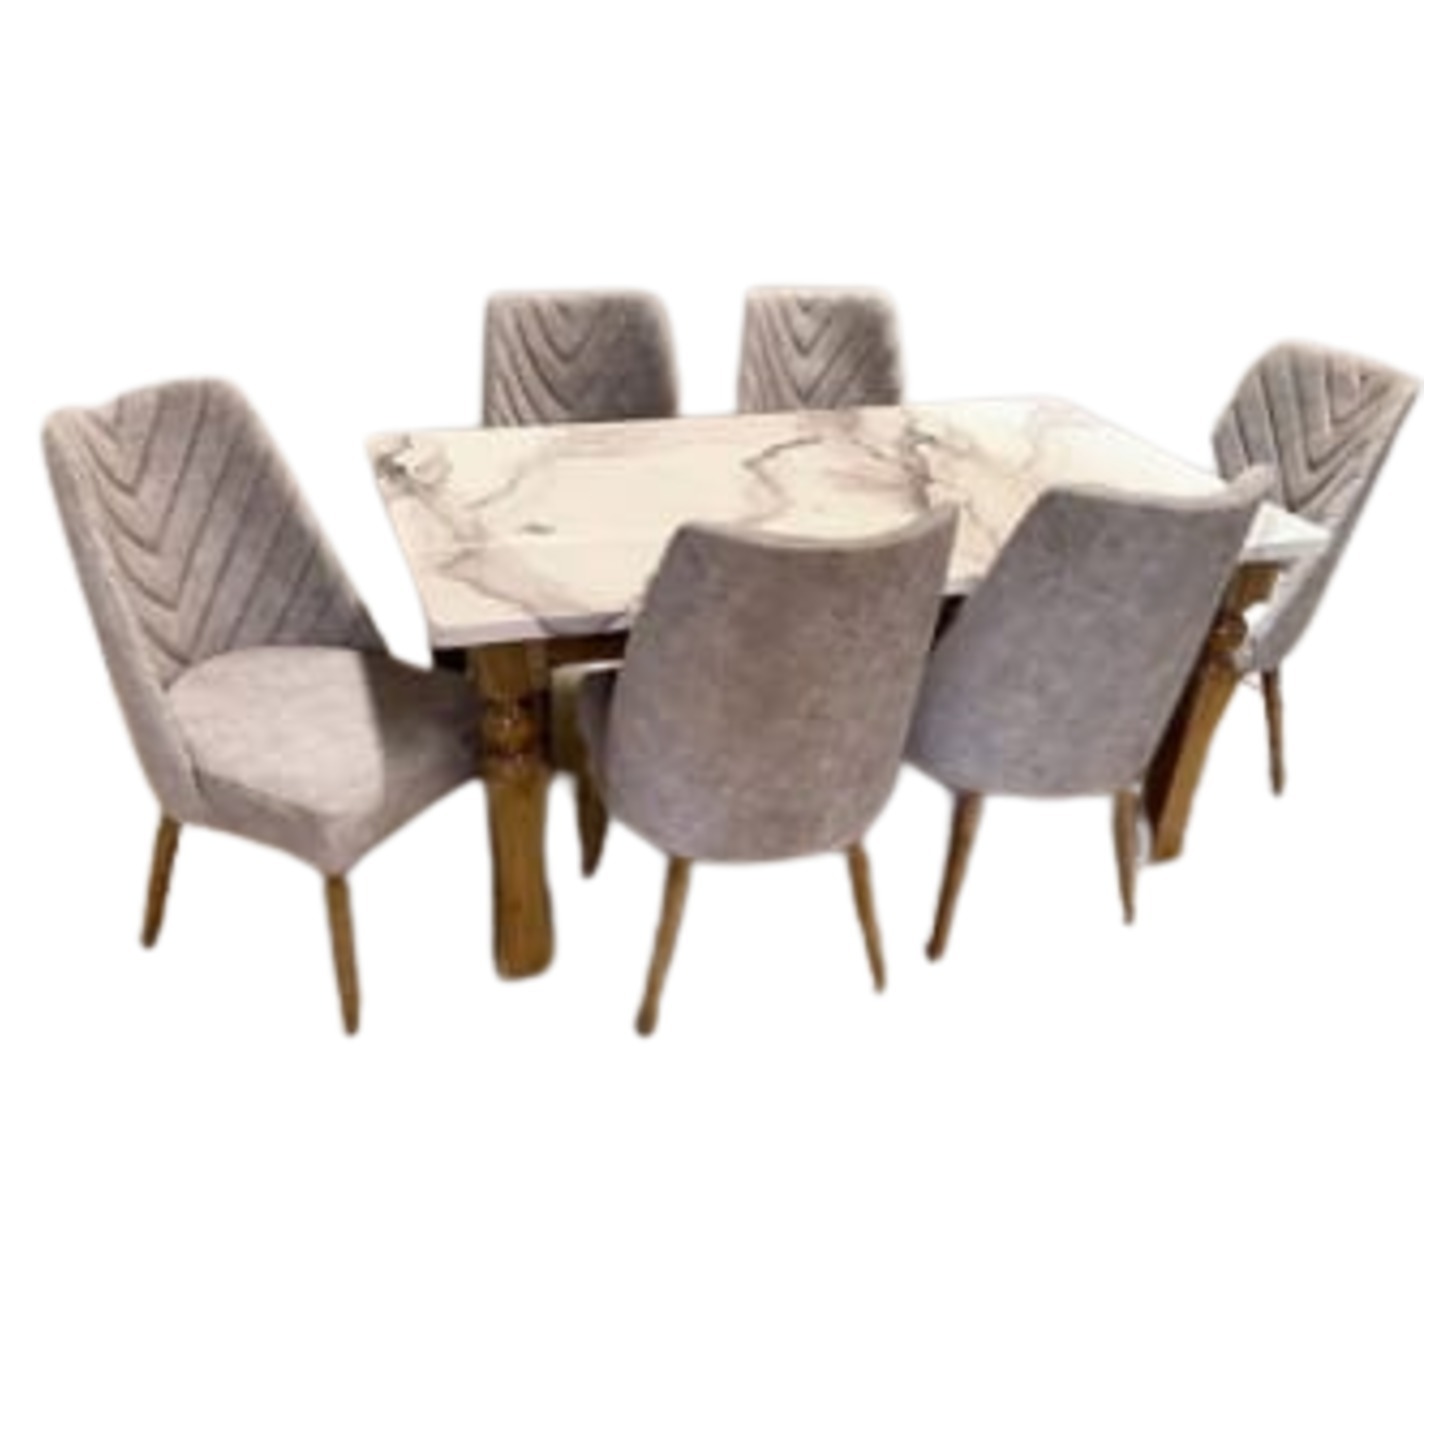 DW Marble Top H-006 Six Seater Dining Table Set in Brown Colour